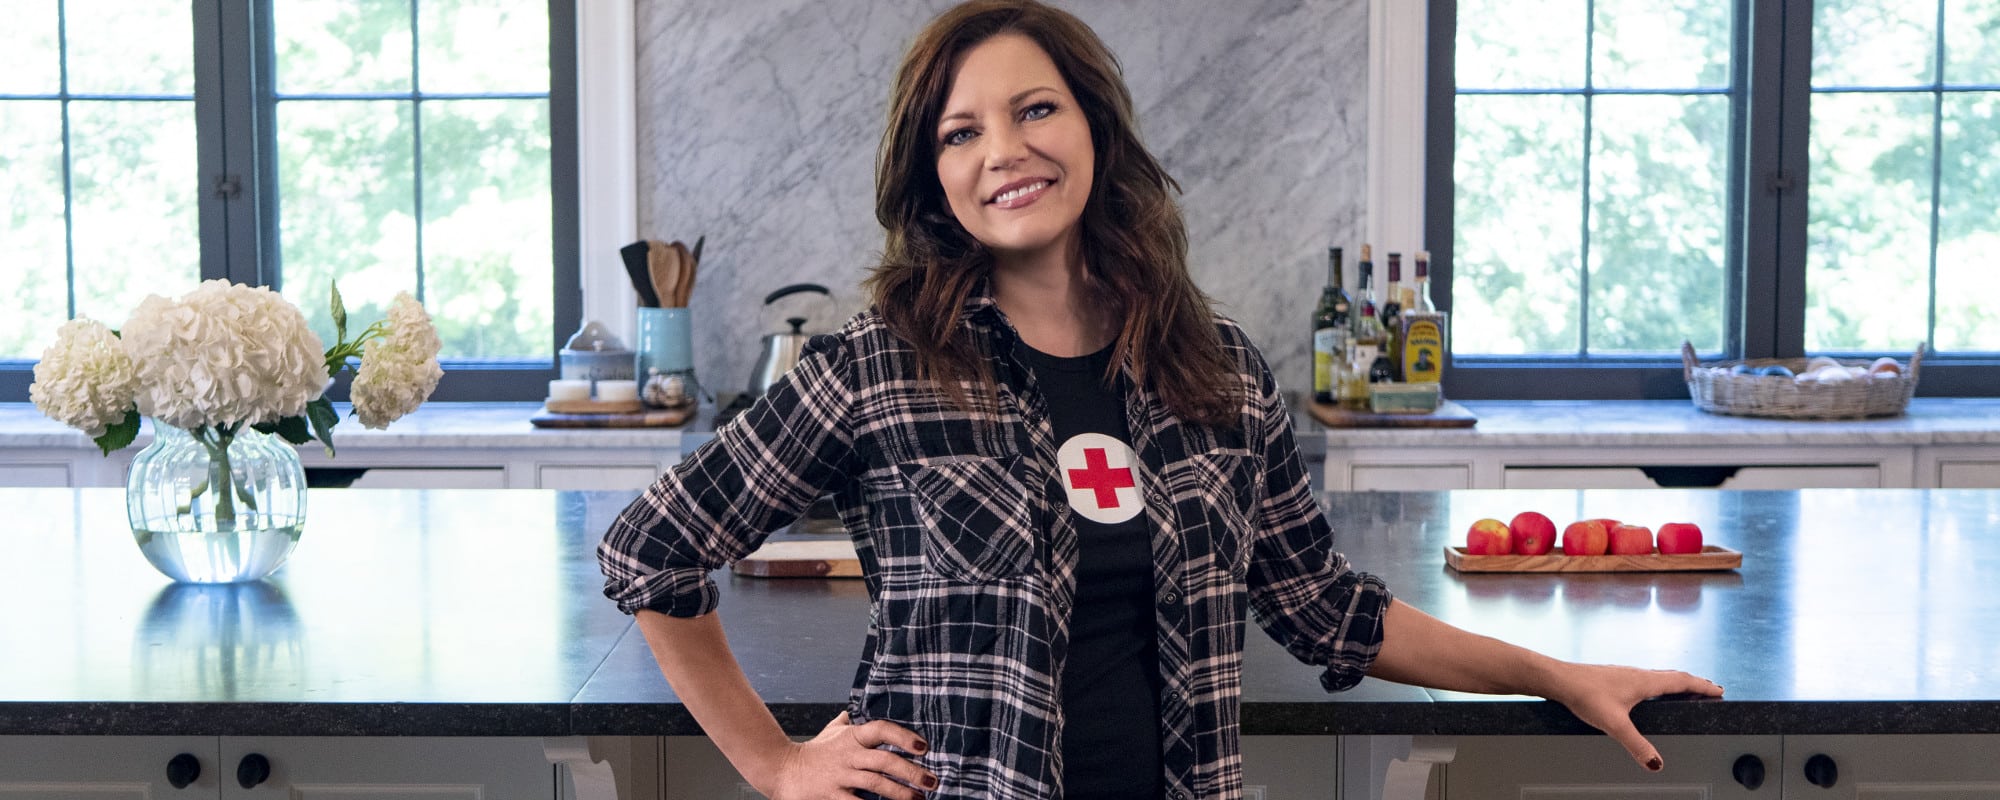 Rather Than Dwelling on the Devastating Year of 2020, Martina McBride is Finding a Way to Give Back